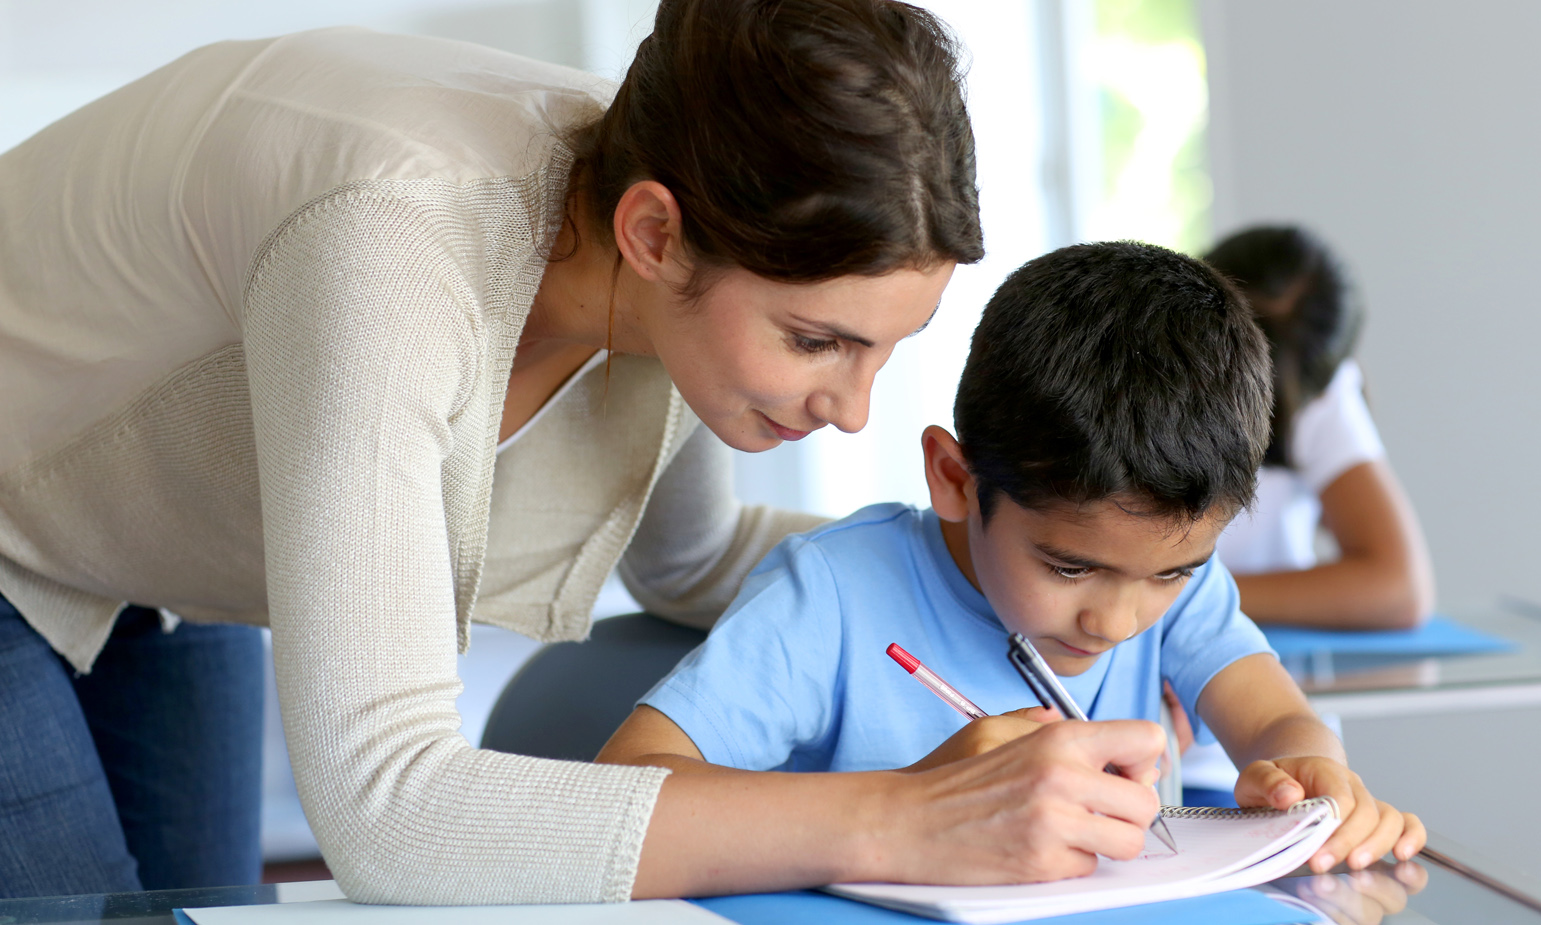 Teacher leaning over shoulder of young boy at his classroom desk, guiding him by marking with her pencil on his notebook